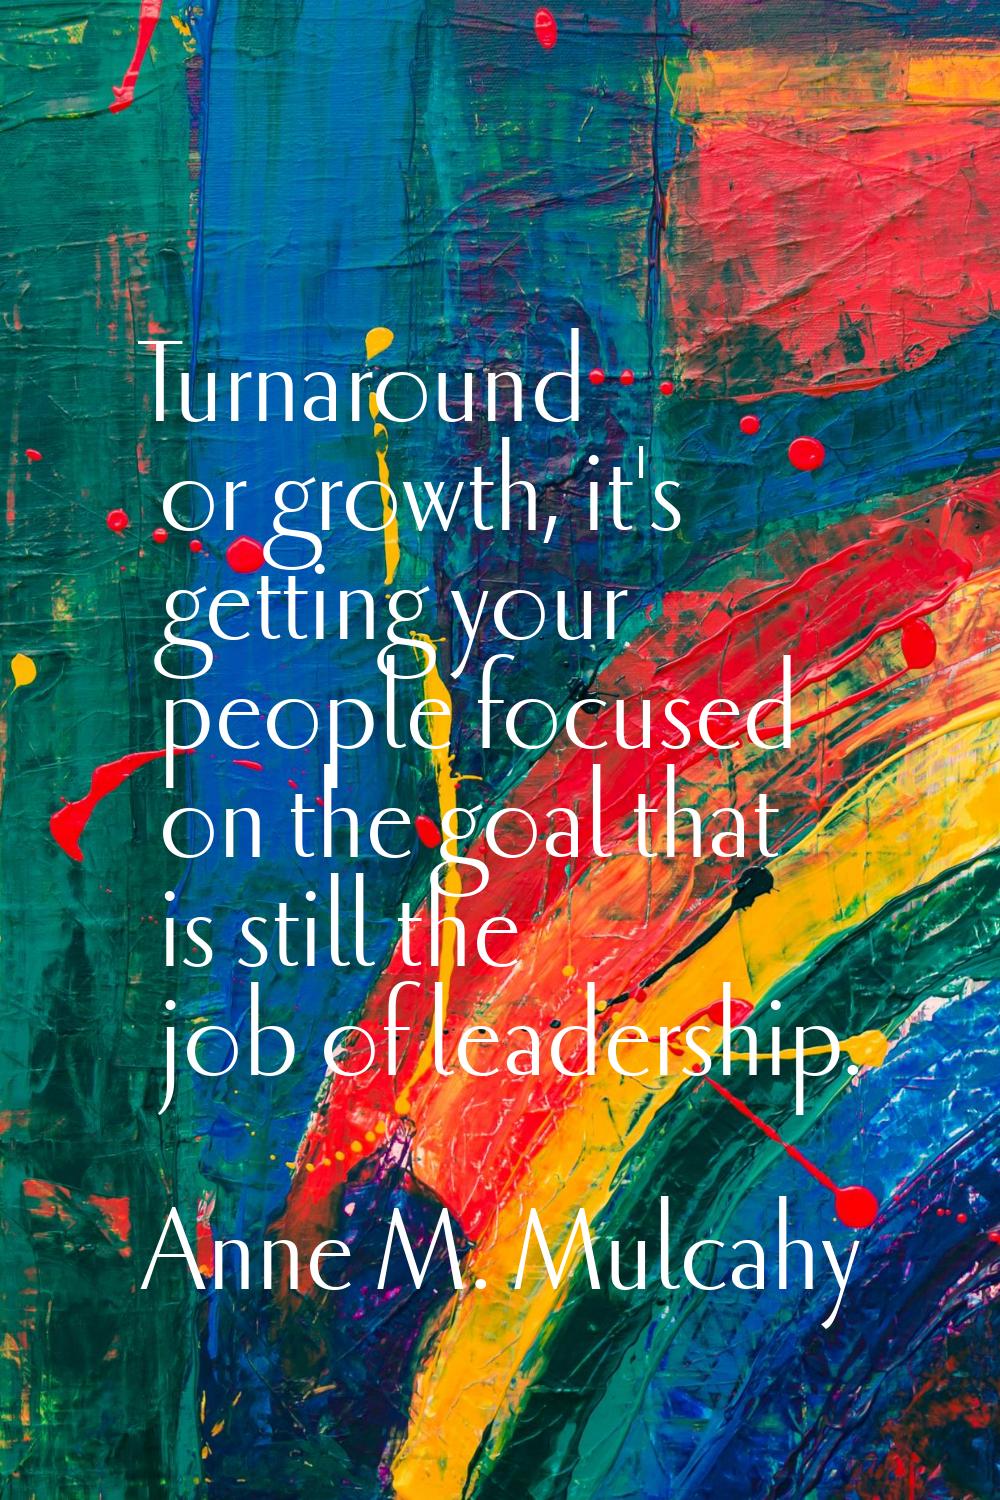 Turnaround or growth, it's getting your people focused on the goal that is still the job of leaders